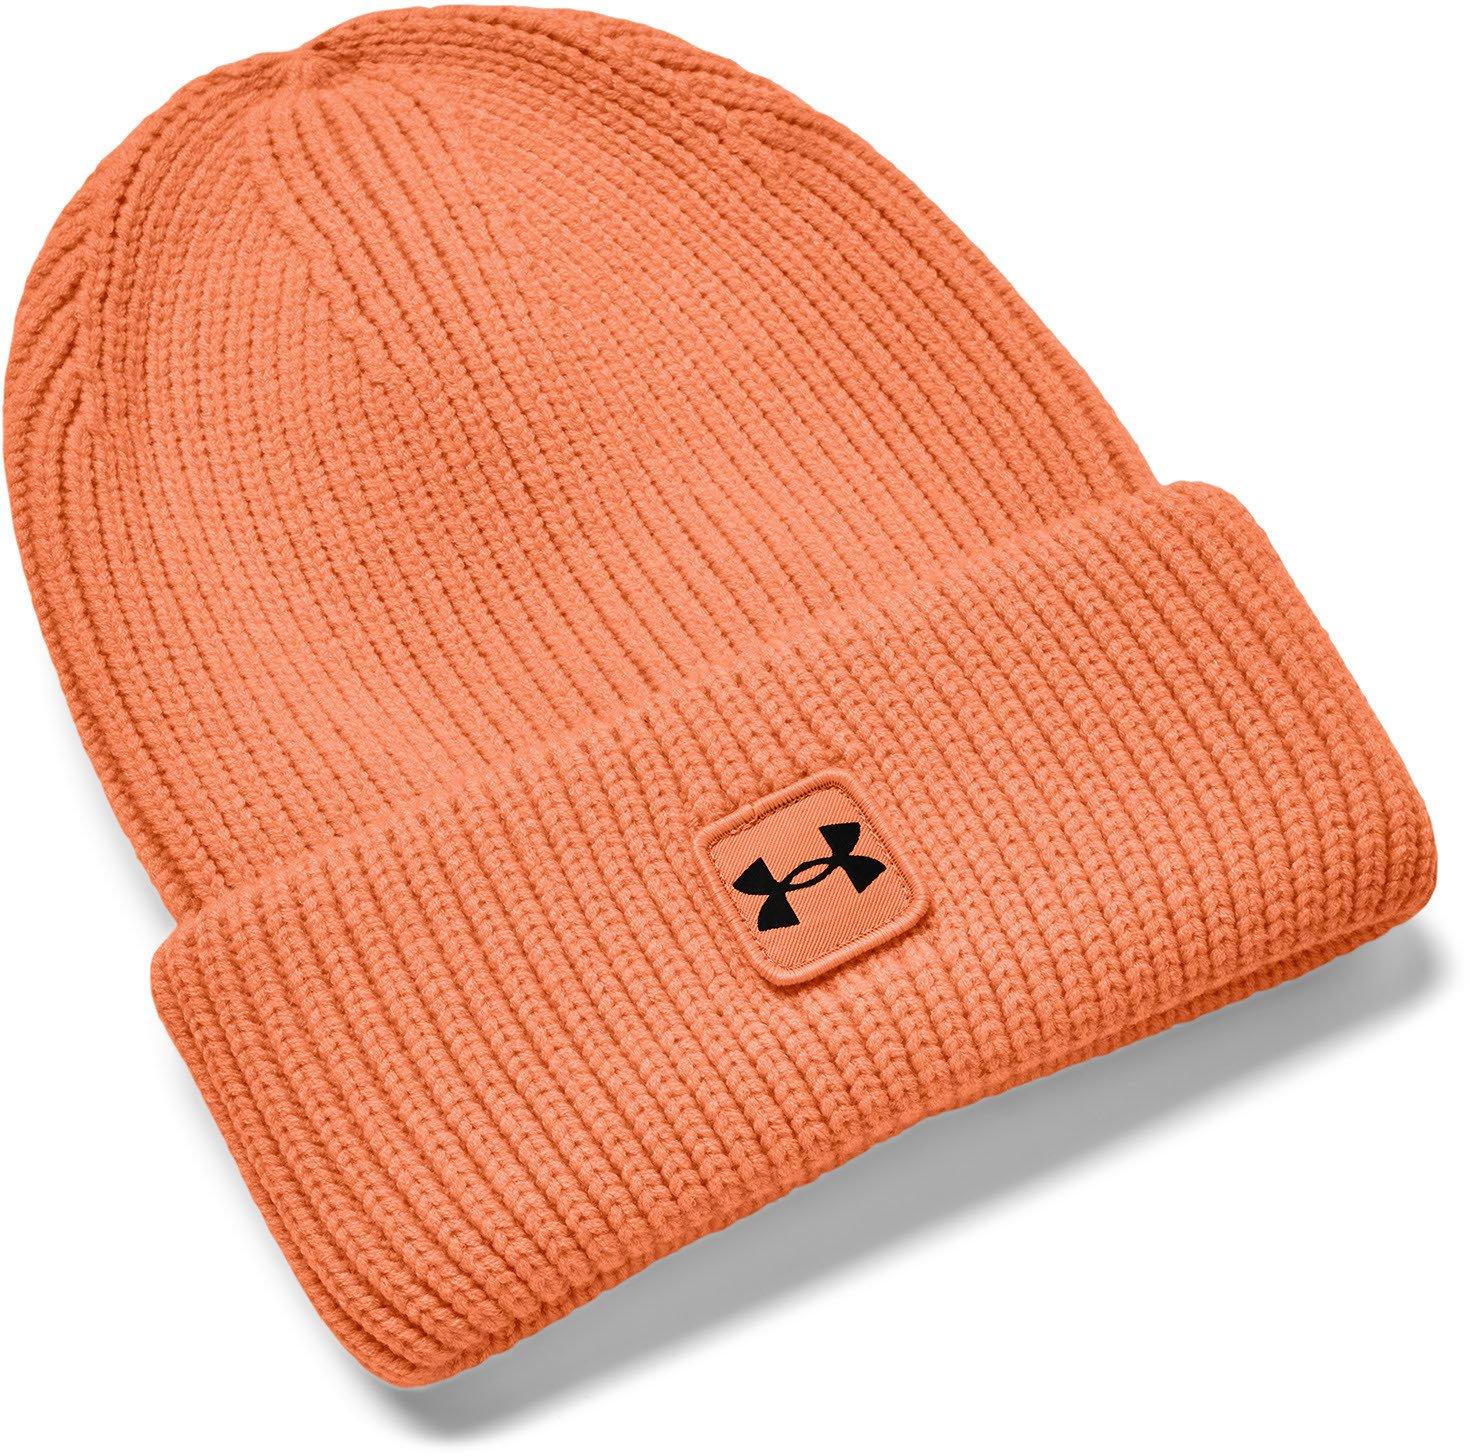 Under Armour Halftime Ribbed